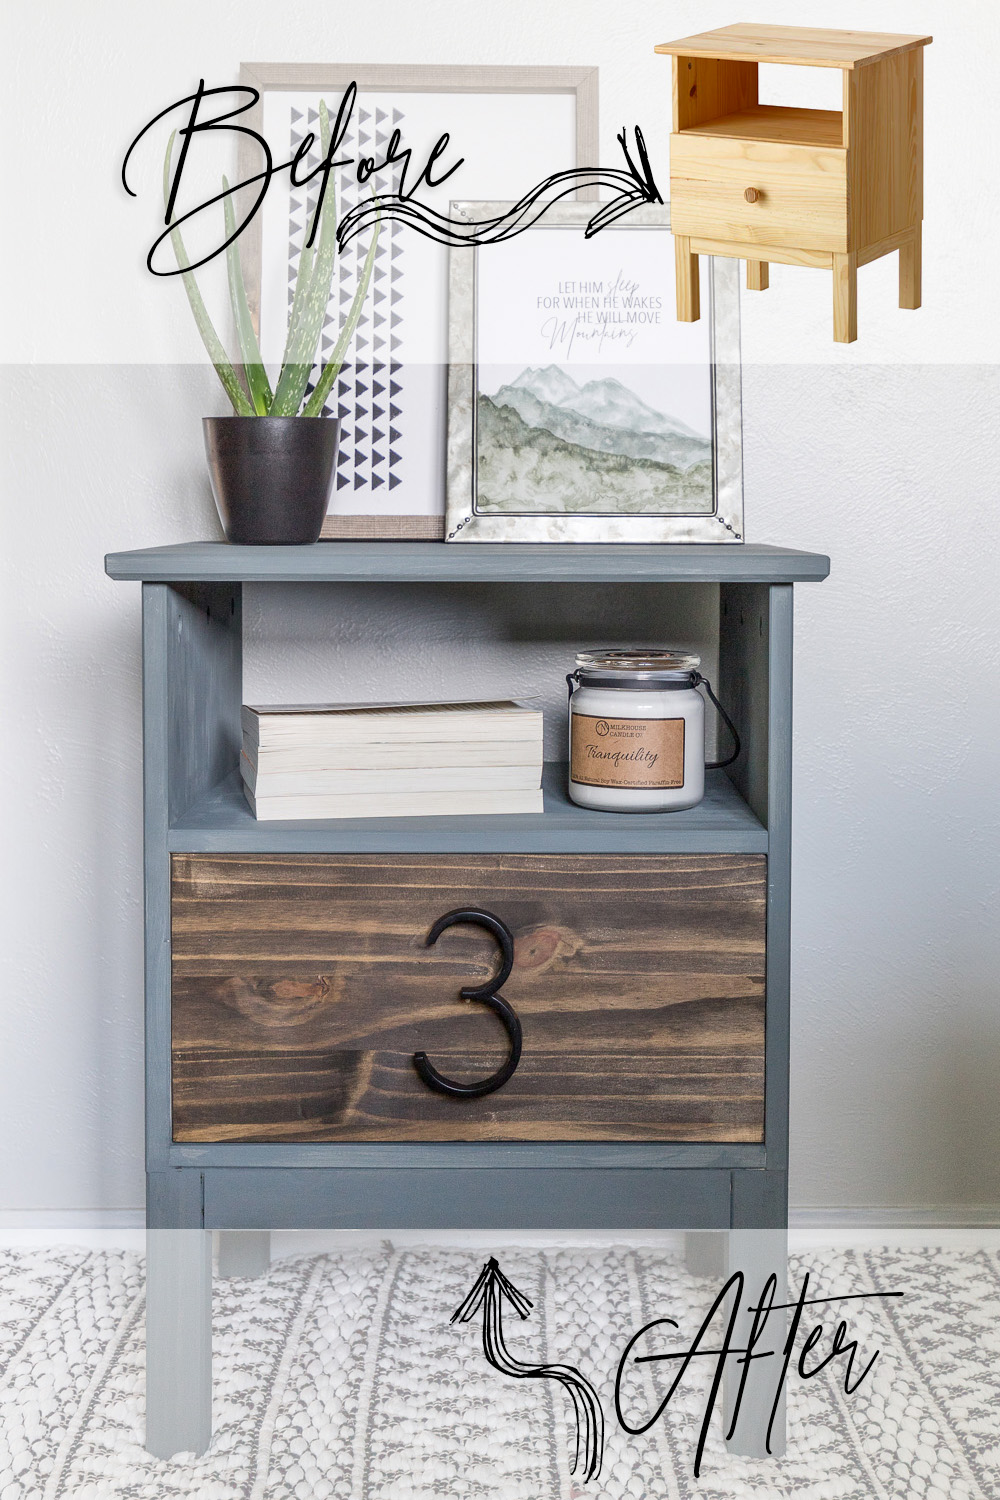 Give this basic Ikea Nightstand an easy modern makeover in just a few hours following the tutorial for this Tarva Nightstand Hack!